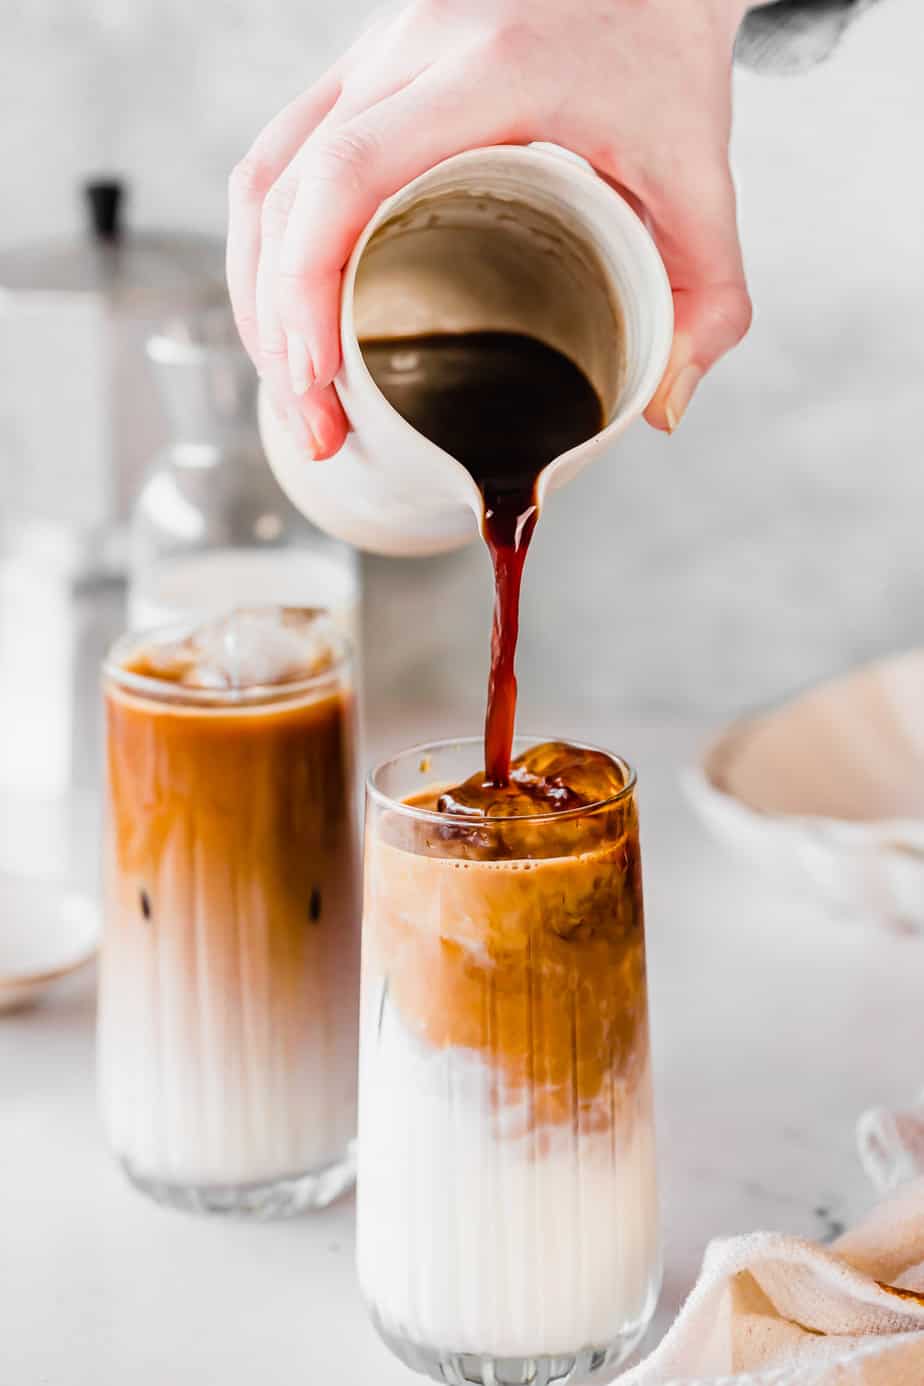 Coffee pouring into a glass from white jug.